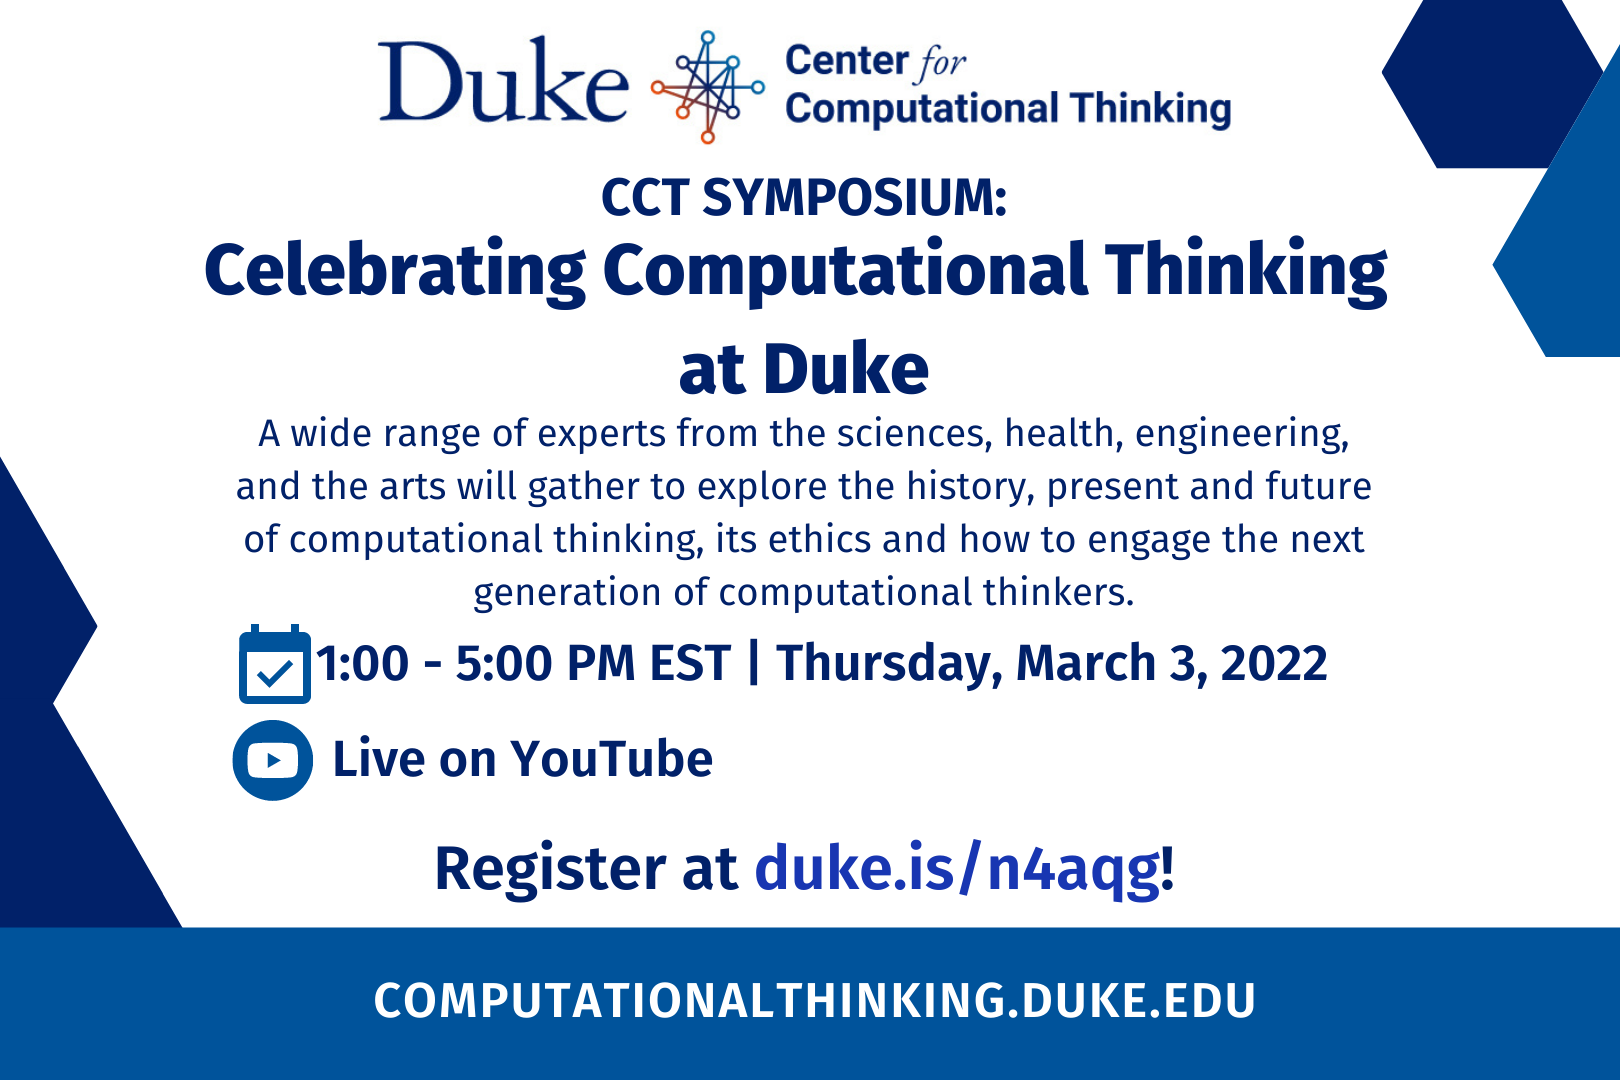 Banner for the CCT Symposium, displaying date, time, and registration link